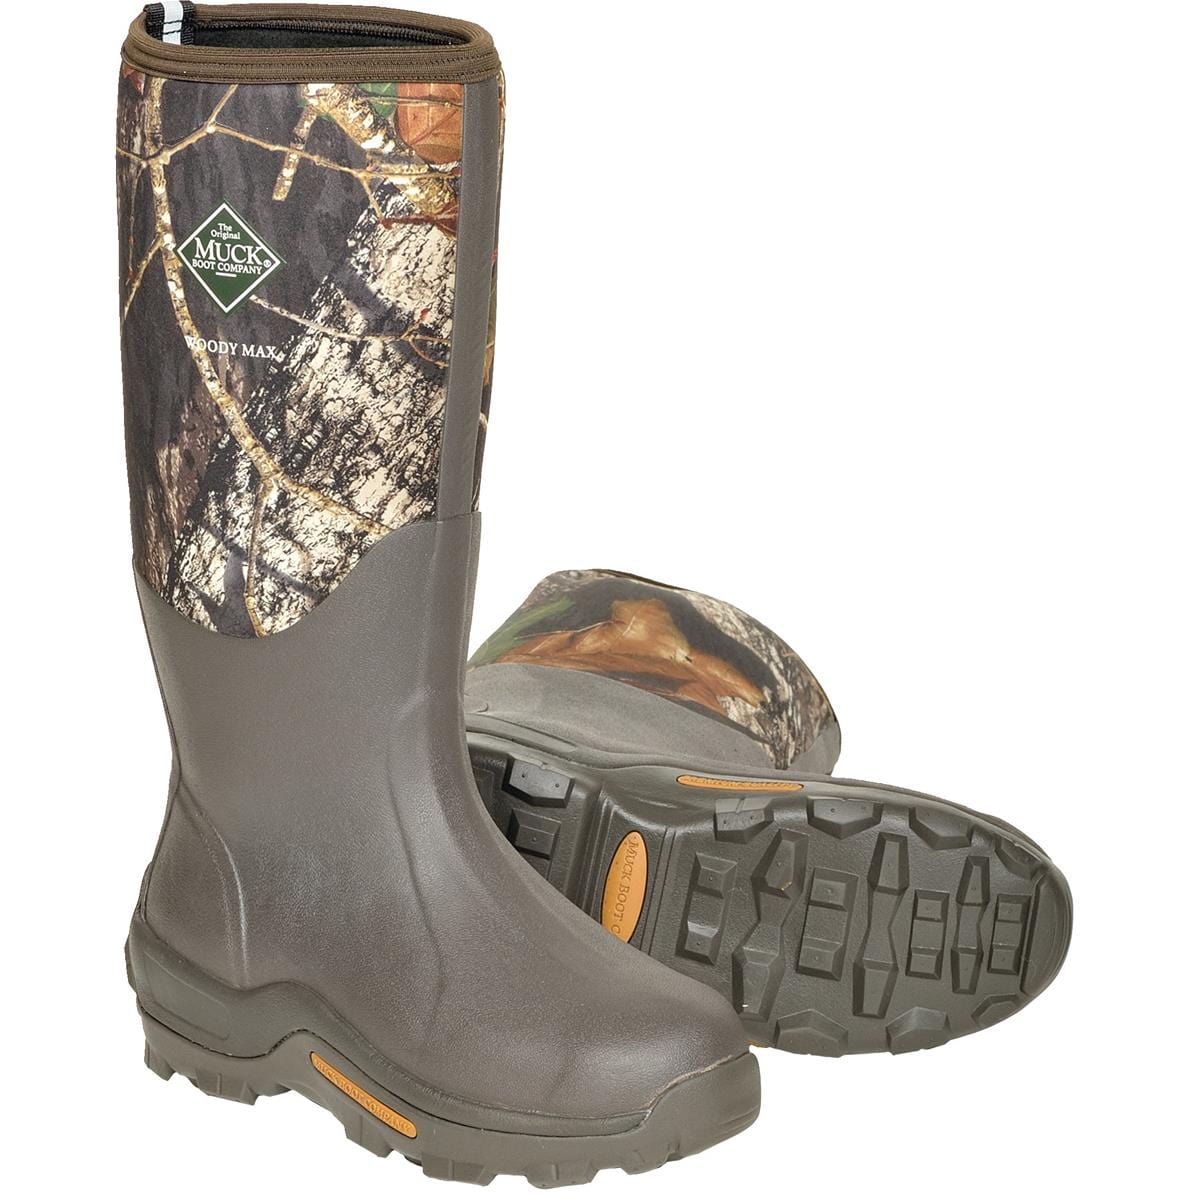 woody max muck boots on sale